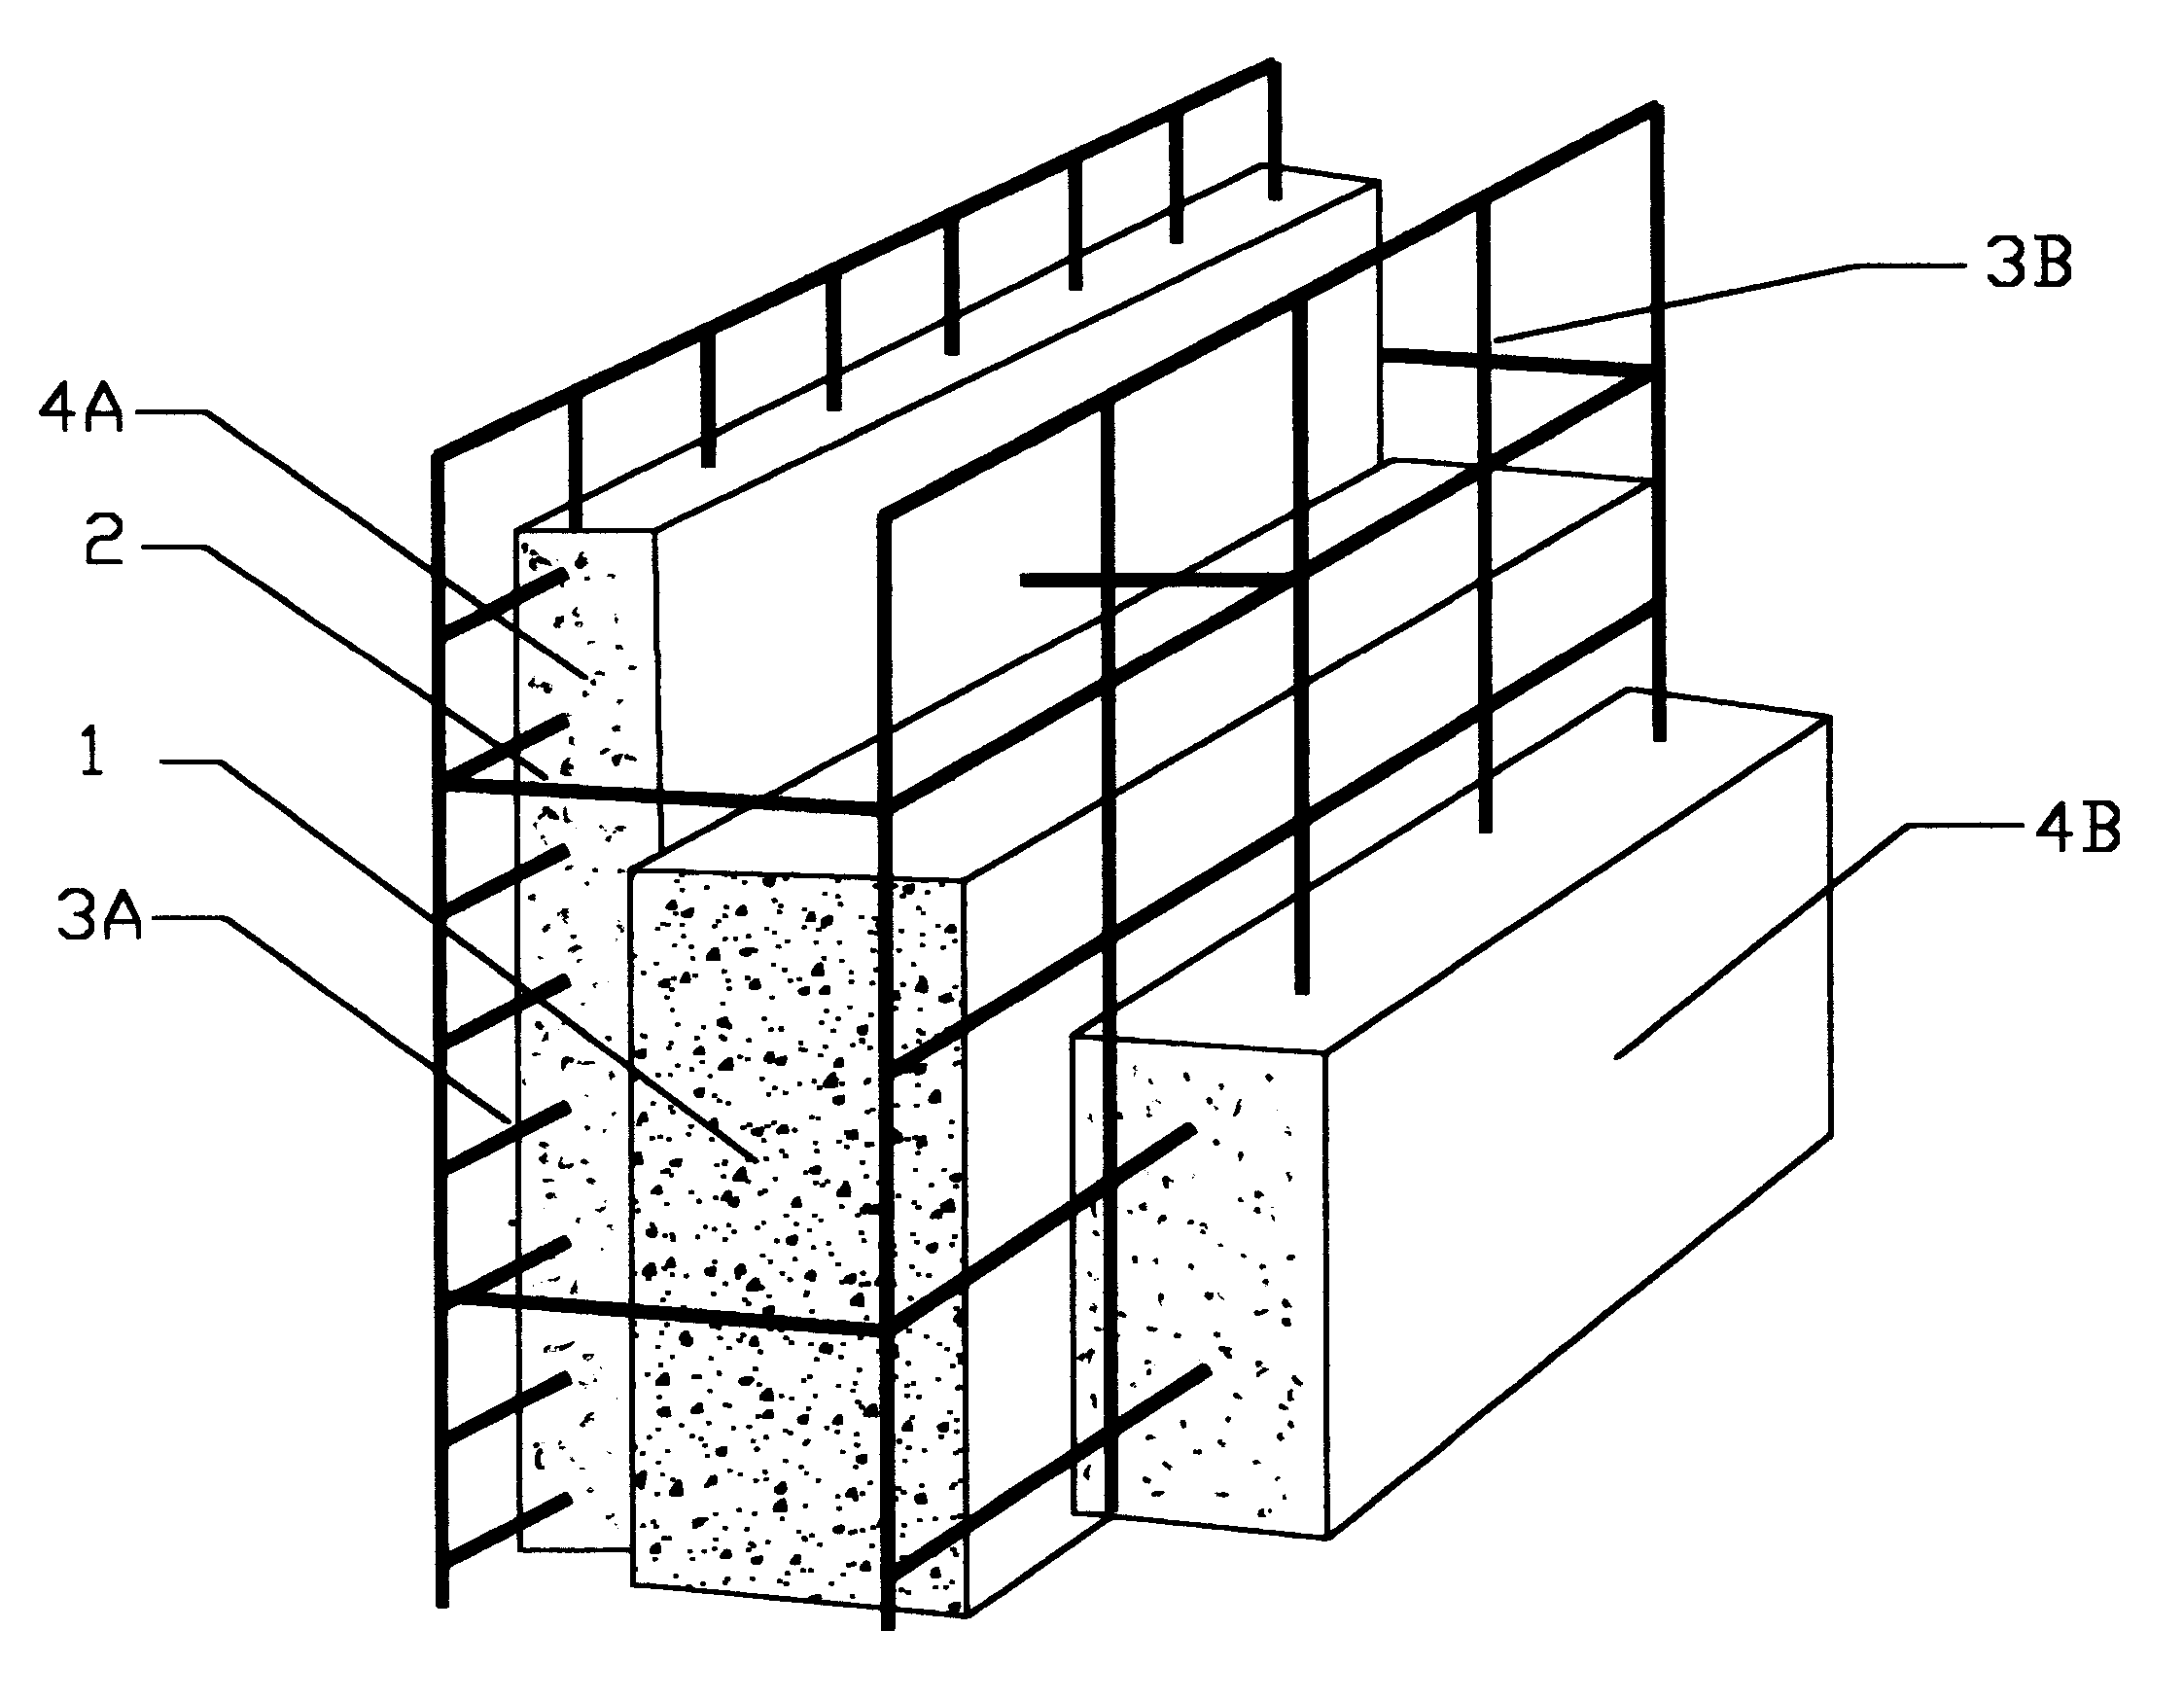 Method for concrete building system using composite panels with highly insulative plastic connector